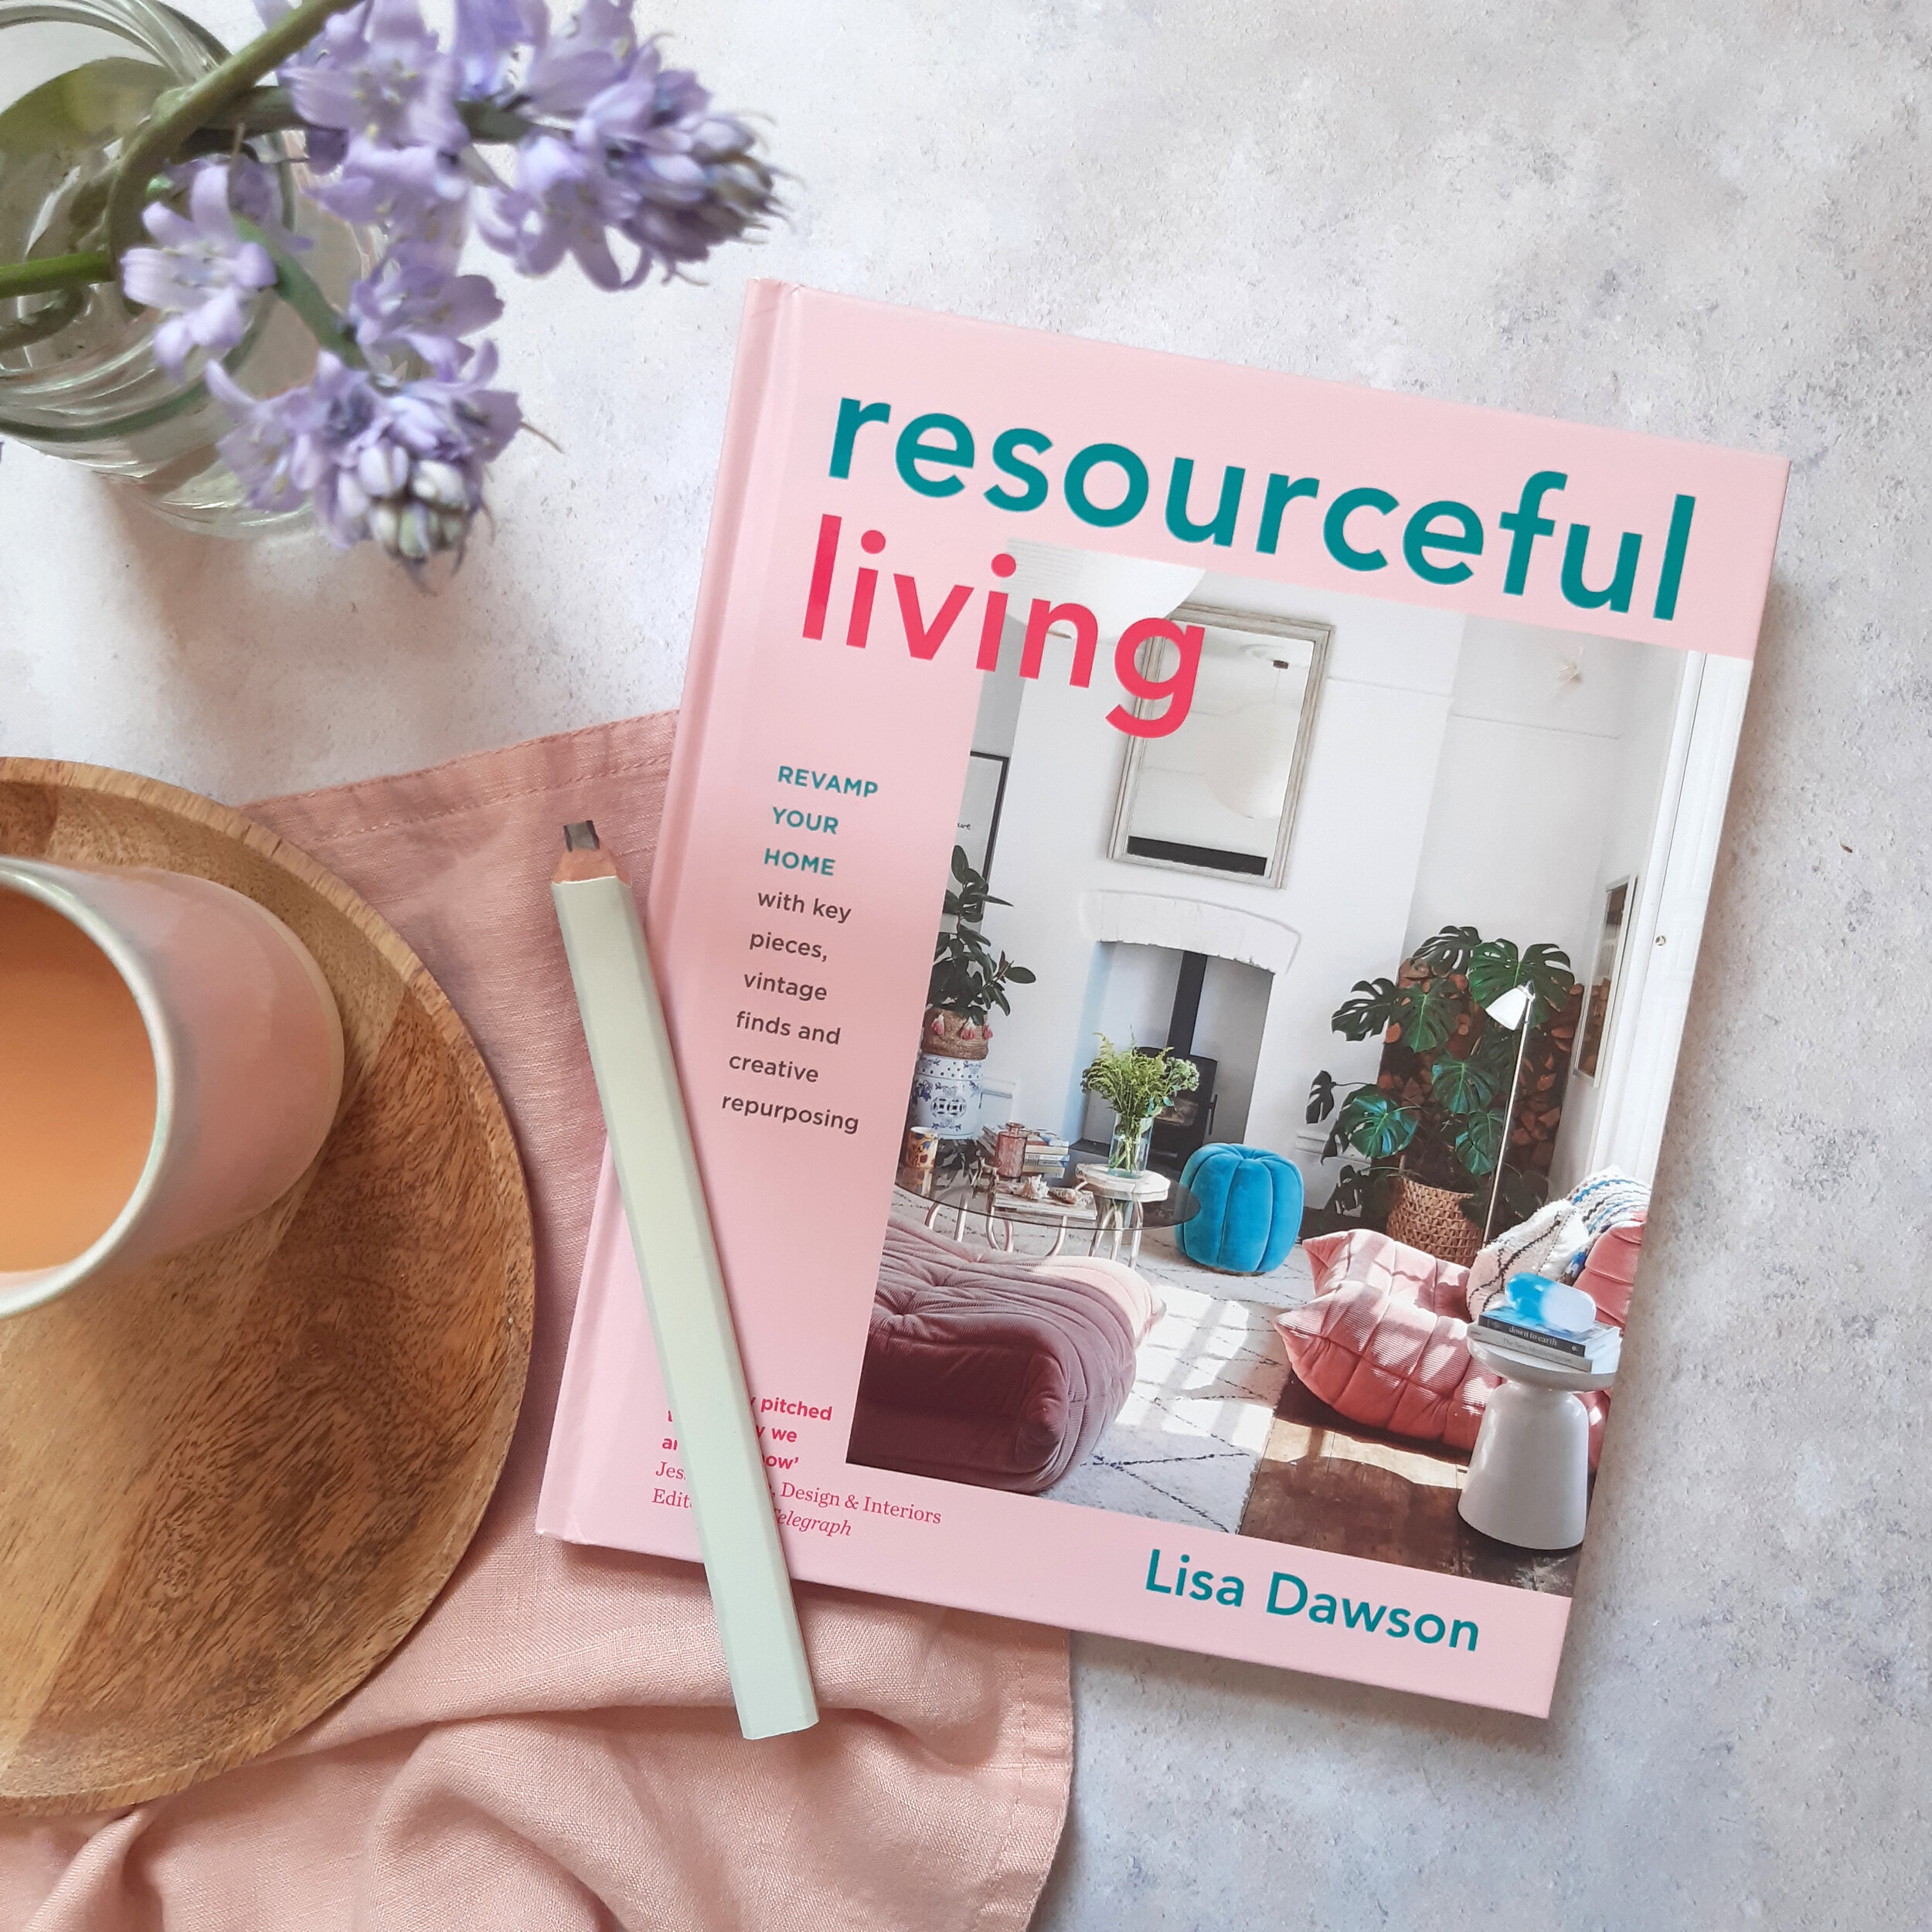 Resourceful Living by Lisa Dawson - book review by 91 Magazine